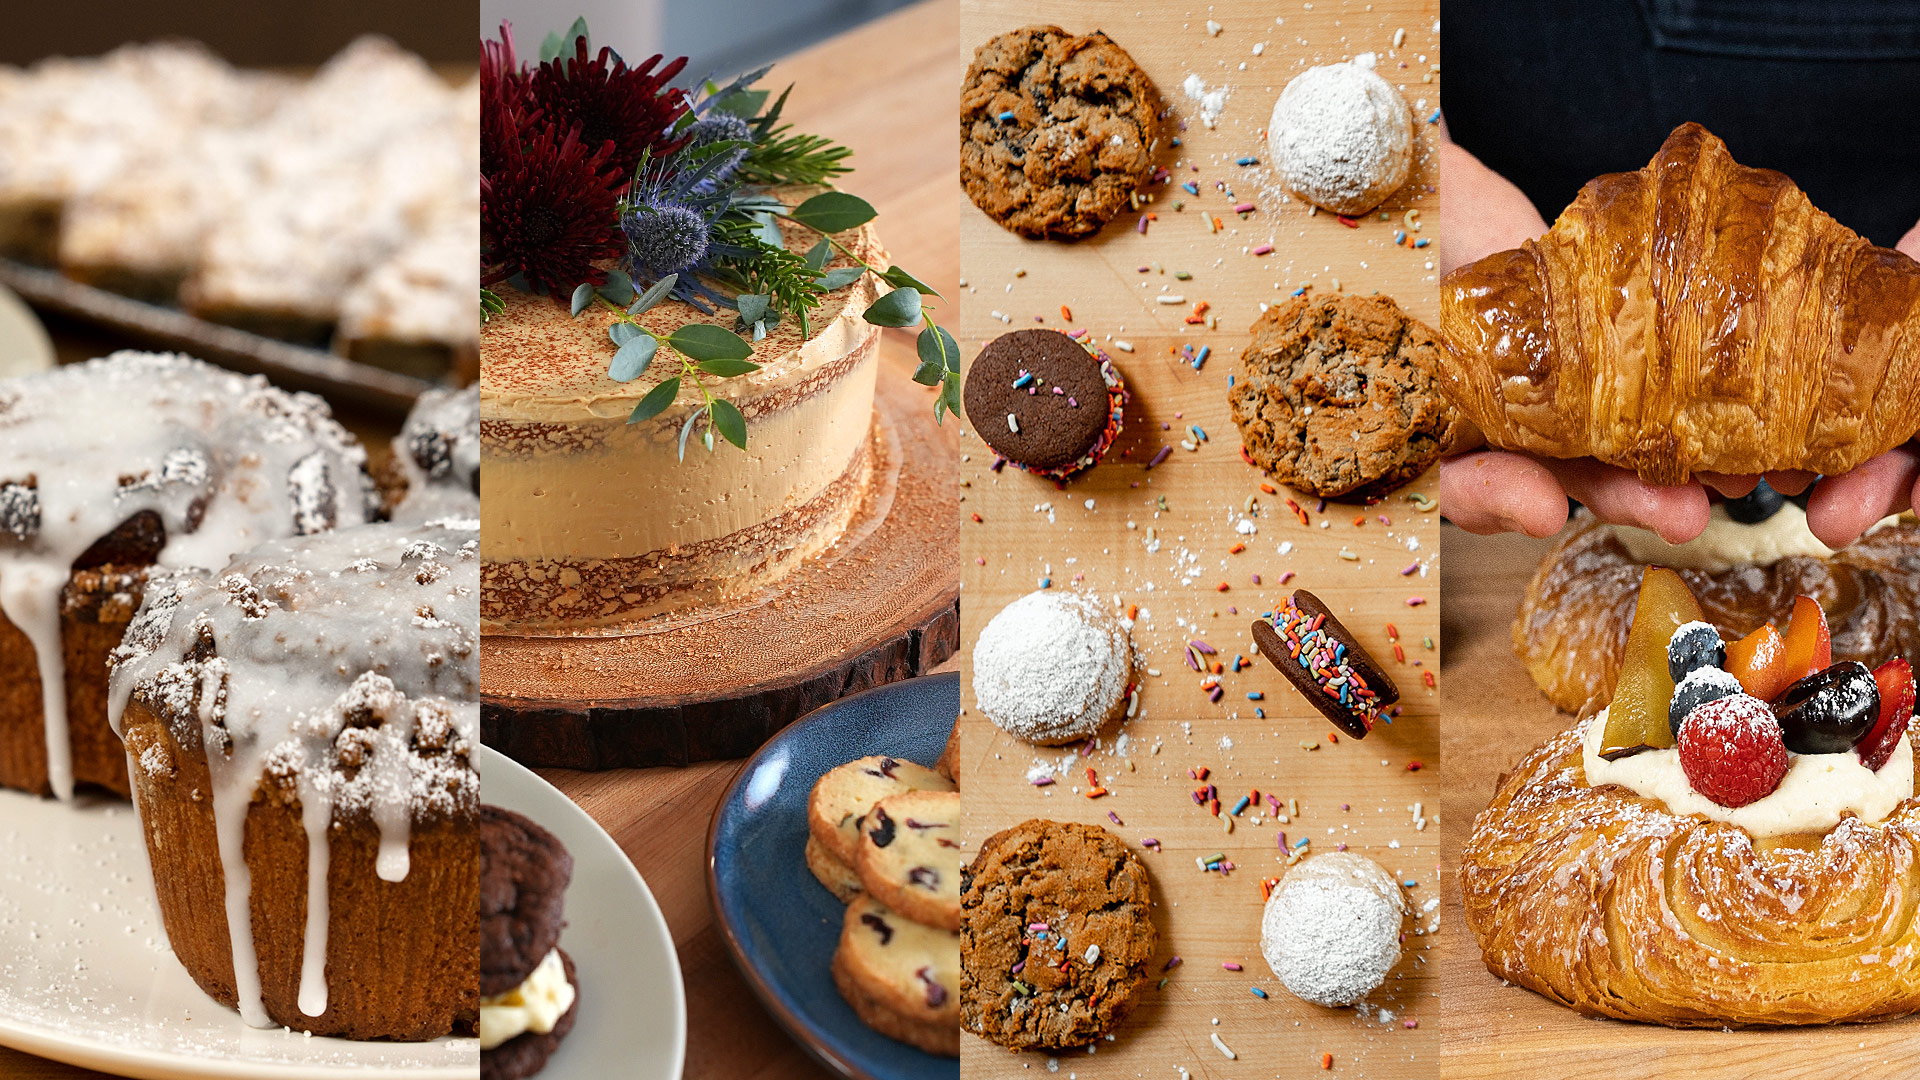 Learn to make pastries, cookies, cakes and more